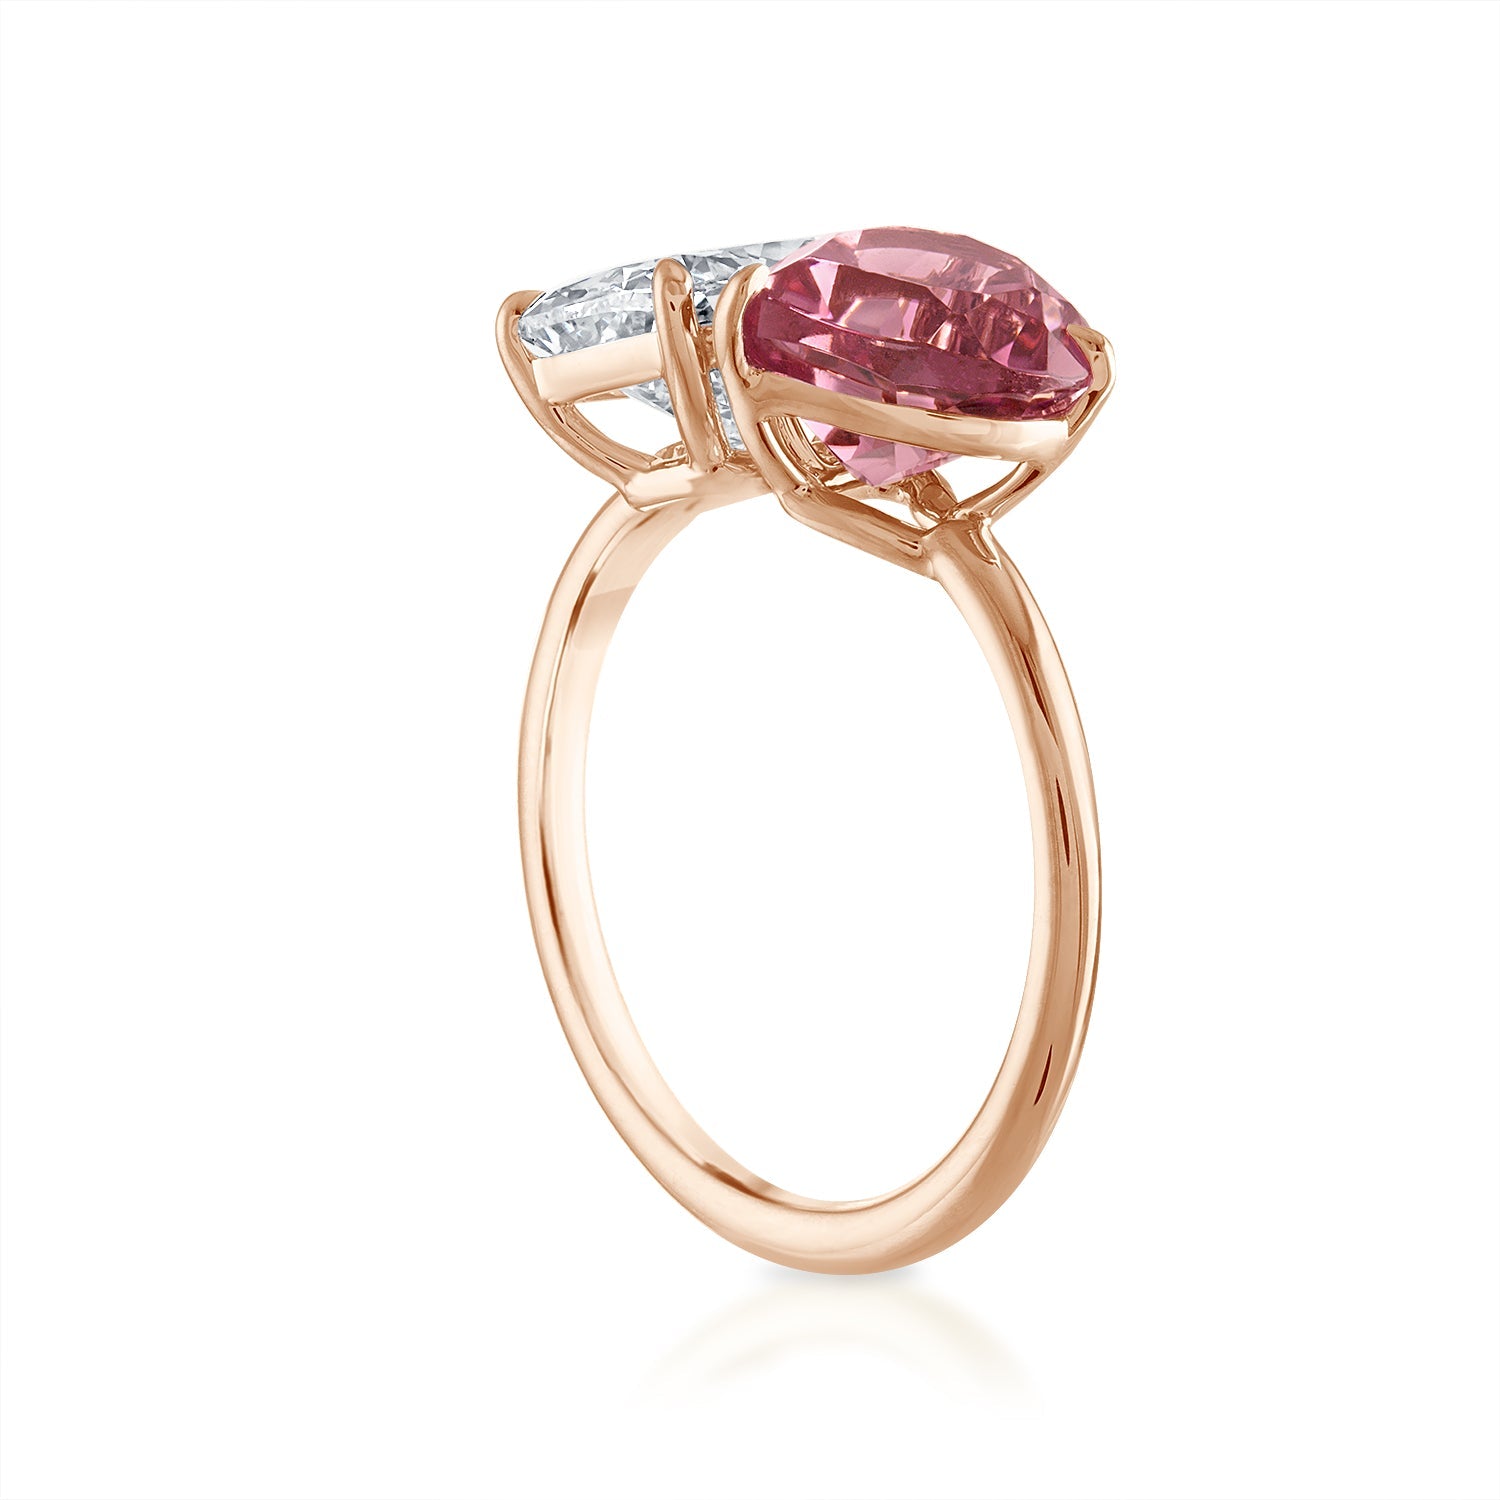 4.72cttw Elongated Cushion Cut and Pink Tourmaline Heart Shape Two-Stone Engagement Ring